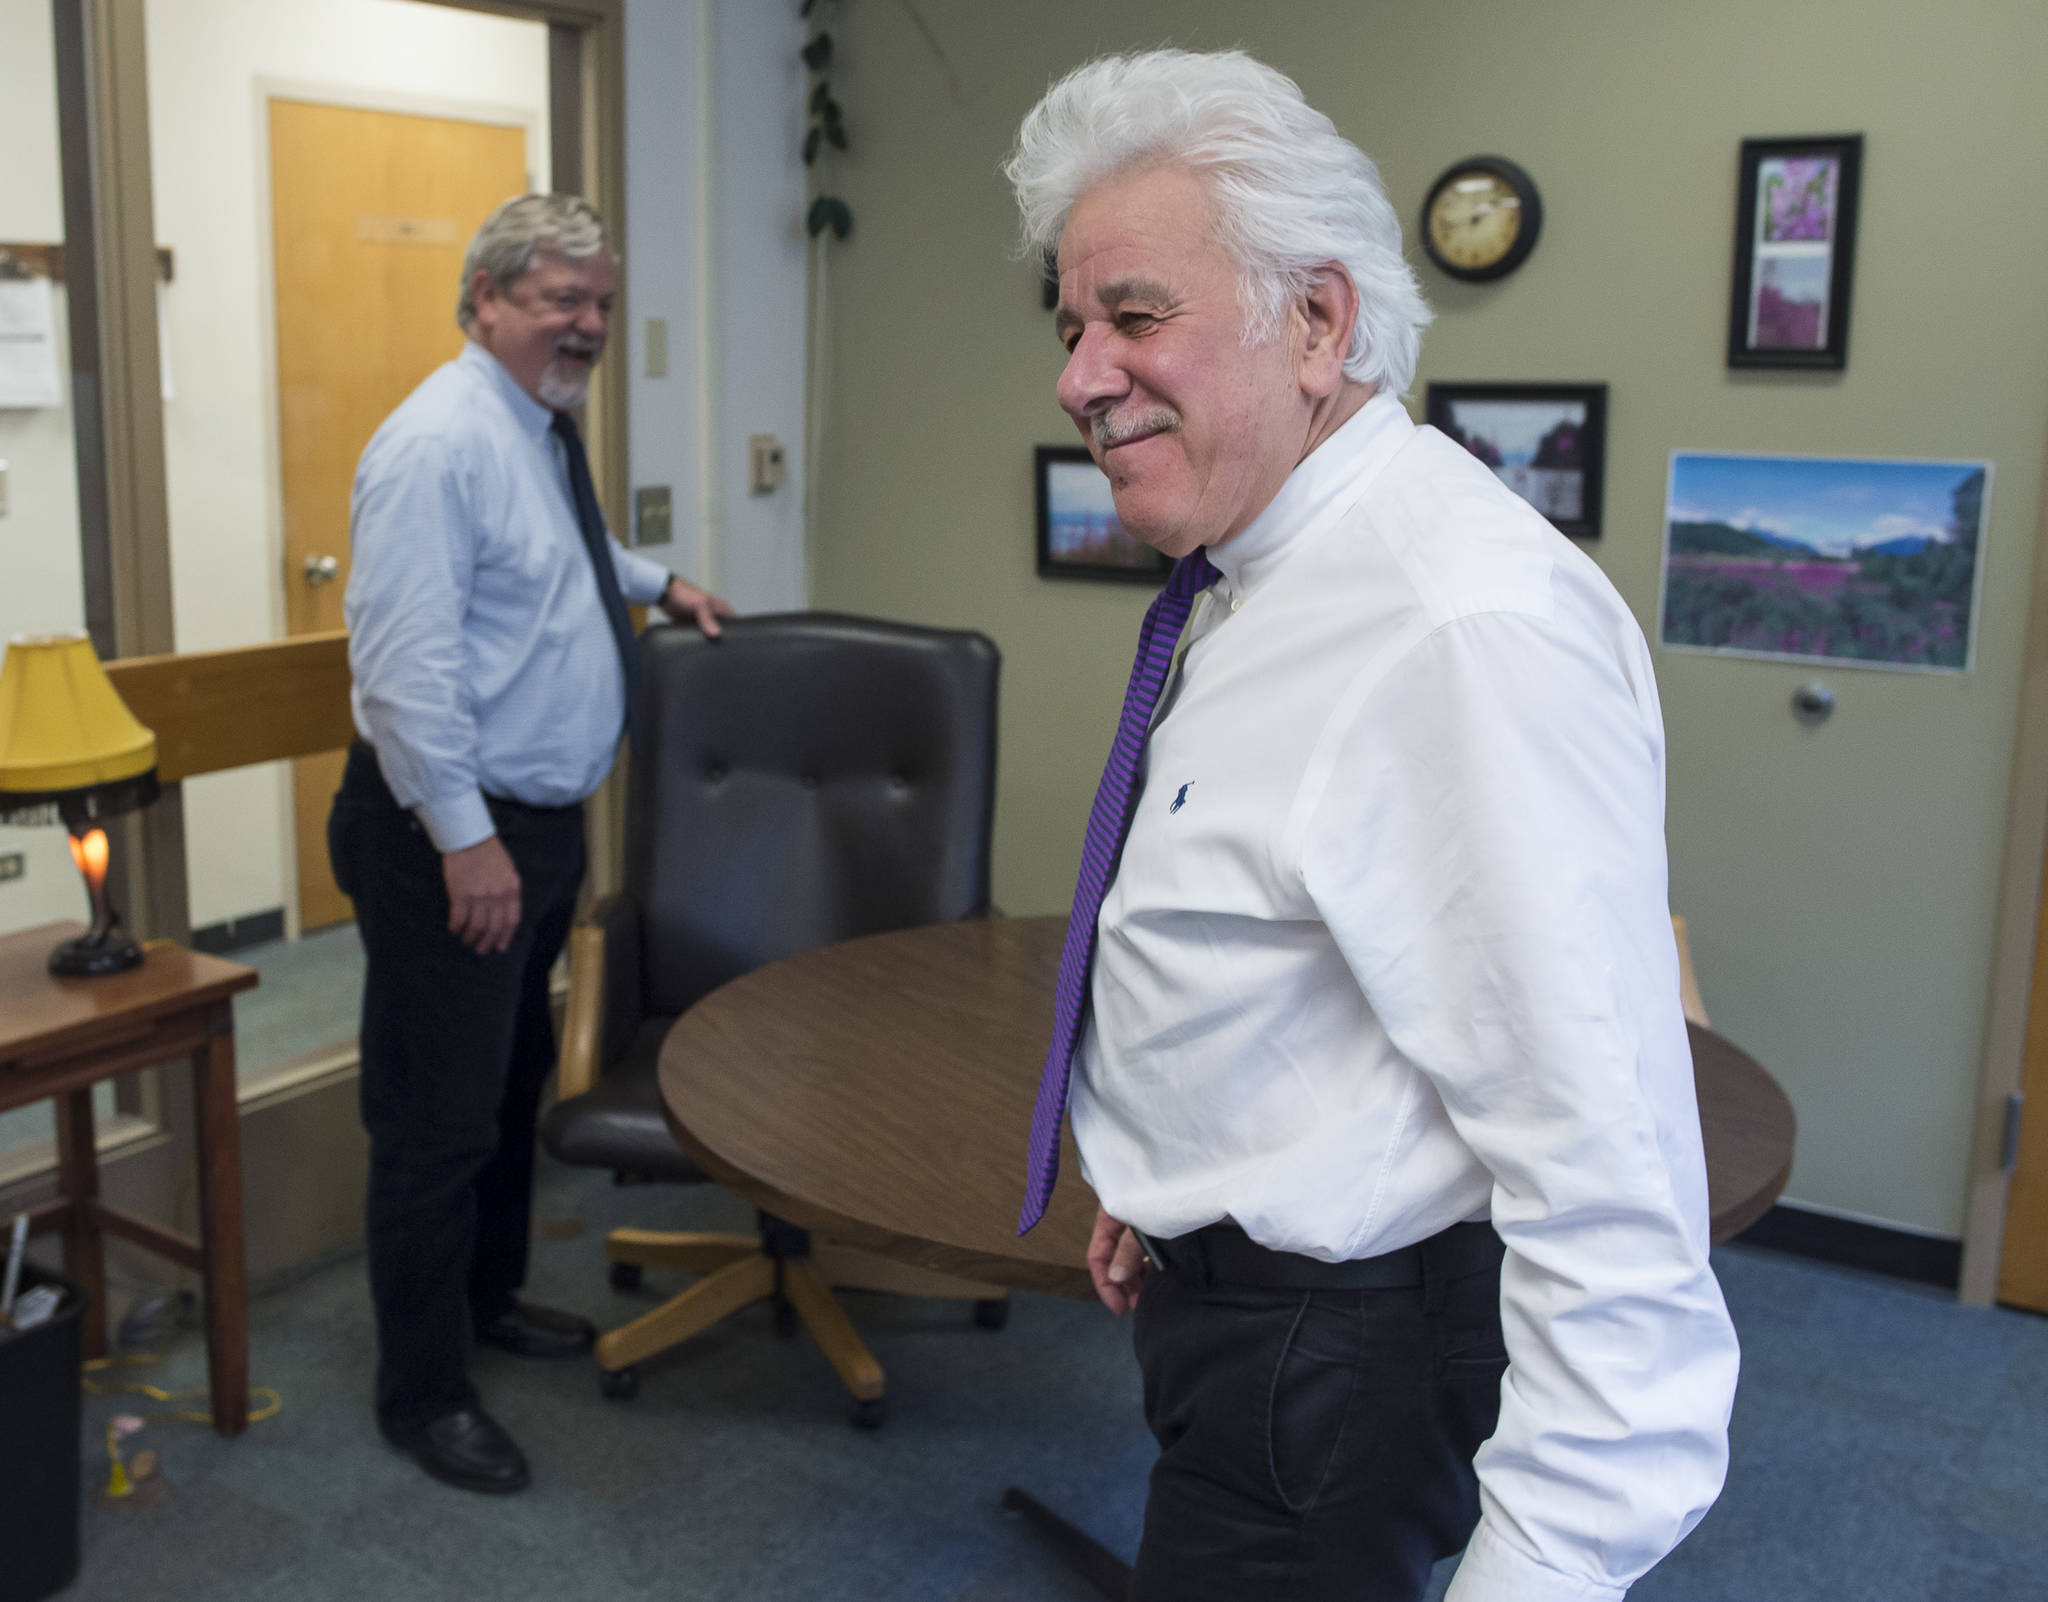 Juneau District Court Judge Thomas Nave, left, and Juneau Superior Court Judge Louis Menendez talk with each other outside their individual offices at the Dimond Courthouse on Friday, June 29, 2018. Both judges are retiring and Friday was their last day at work.